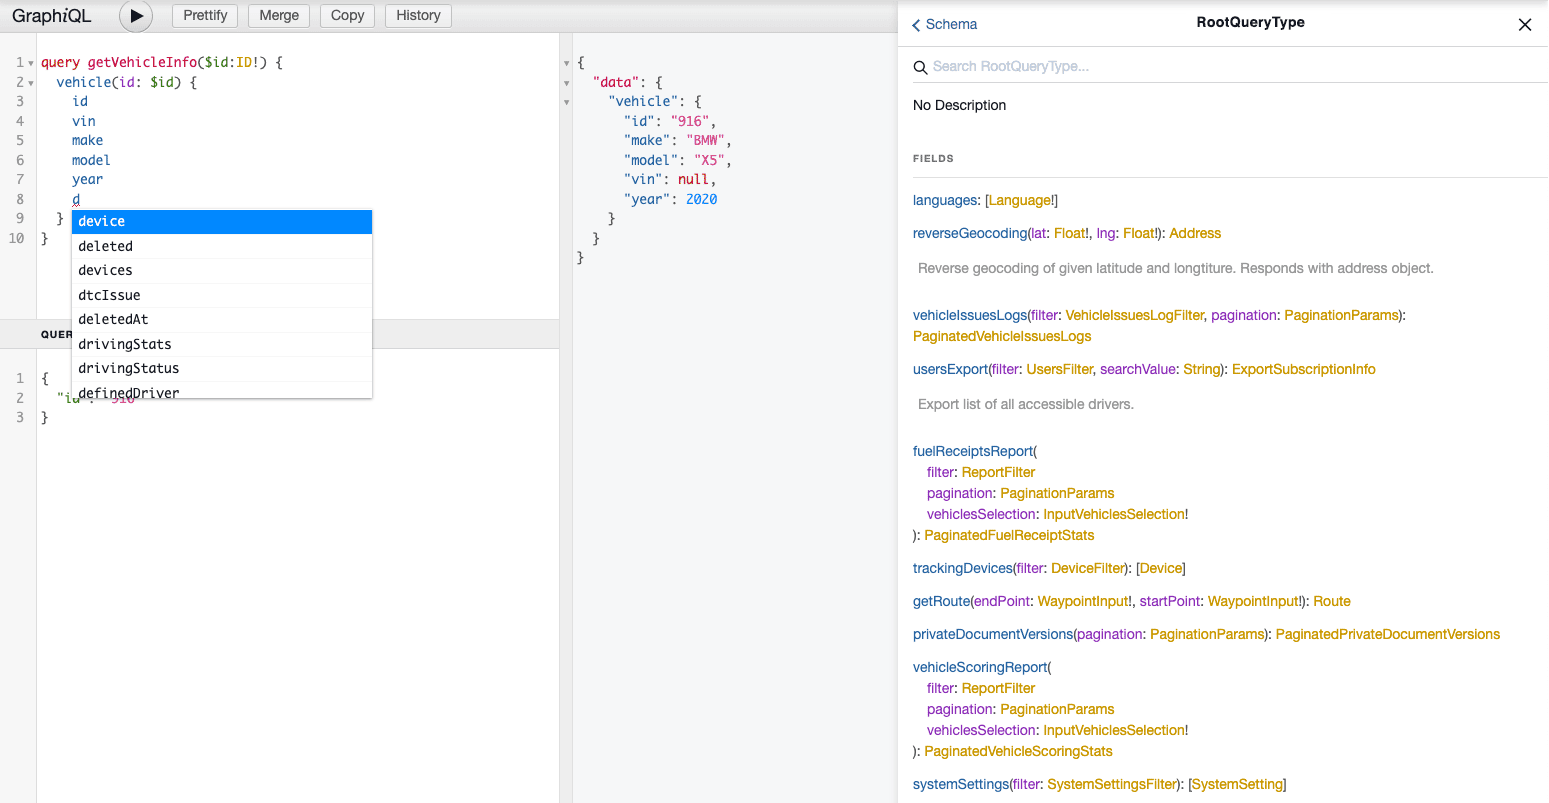 GraphiQL displays the available filters for one of the endpoints